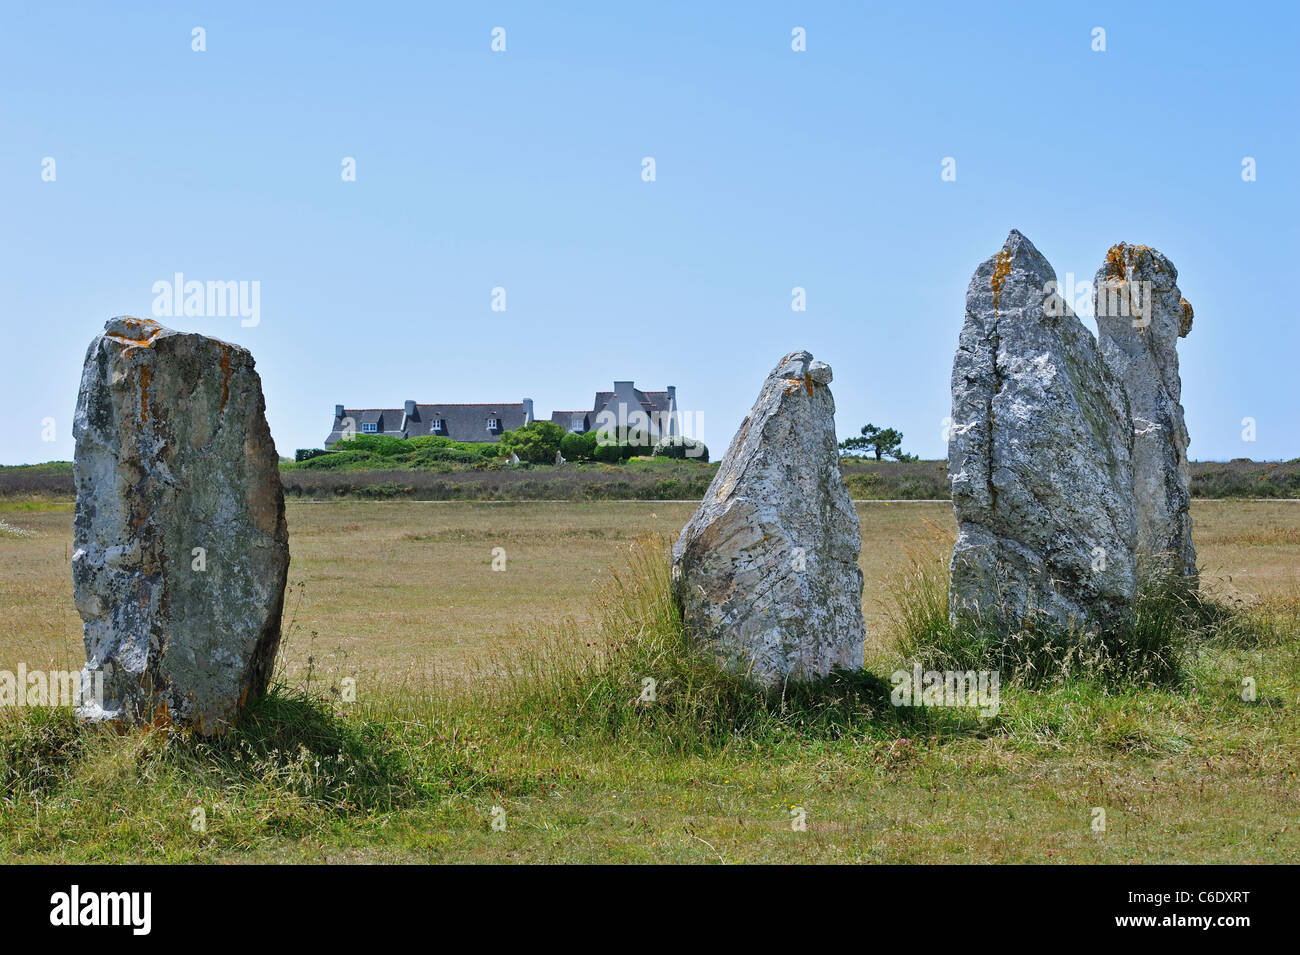 Neolithic Alignements de Lagatjar, stone alignment of megalithic standing stones at Camaret-sur-Mer, Brittany, Finistère, France Stock Photo